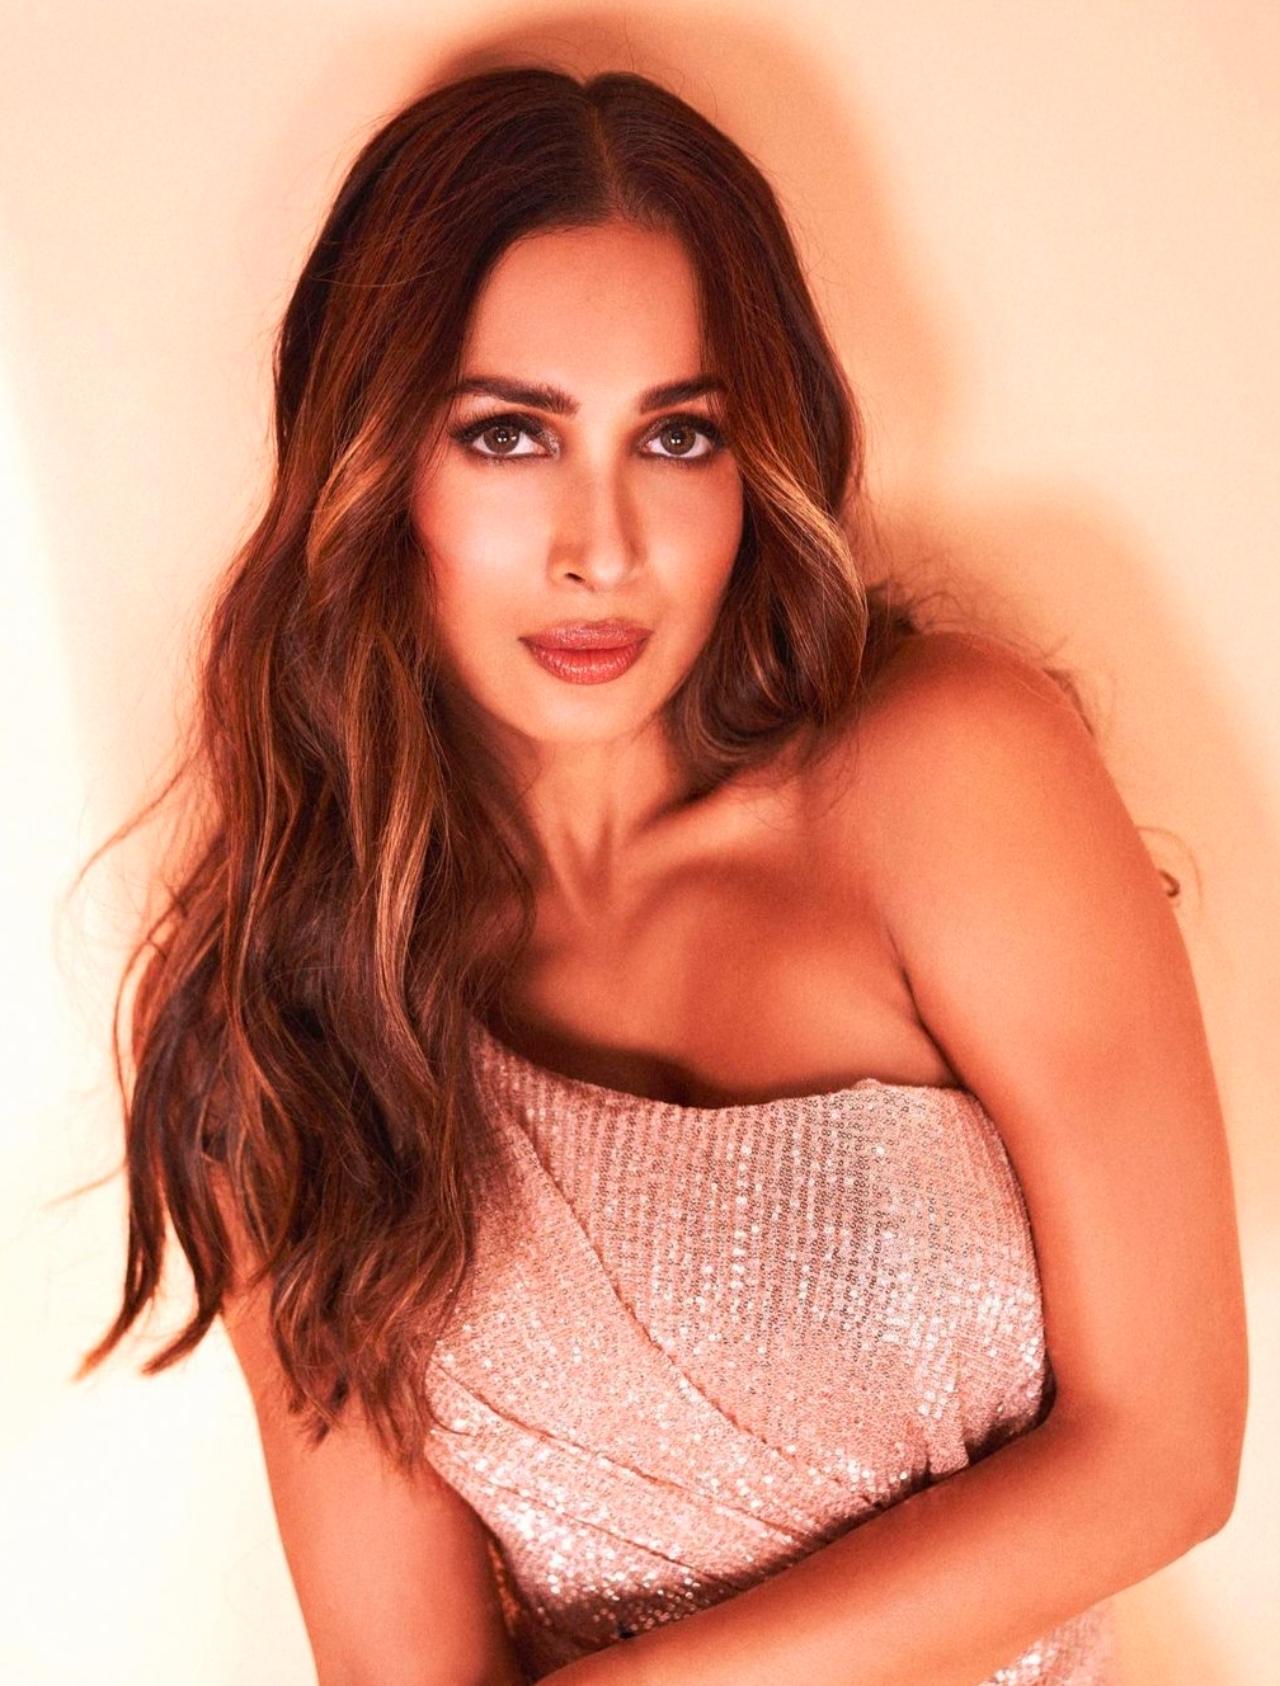 Malaika Arora started her own delivery-only food service called 'Nude bowls' in 2021. She got this idea during the pandemic and quickly acted upon it just to give it a shot. Fortunately, from that day on, this start-up has only seen an upward trend in everything